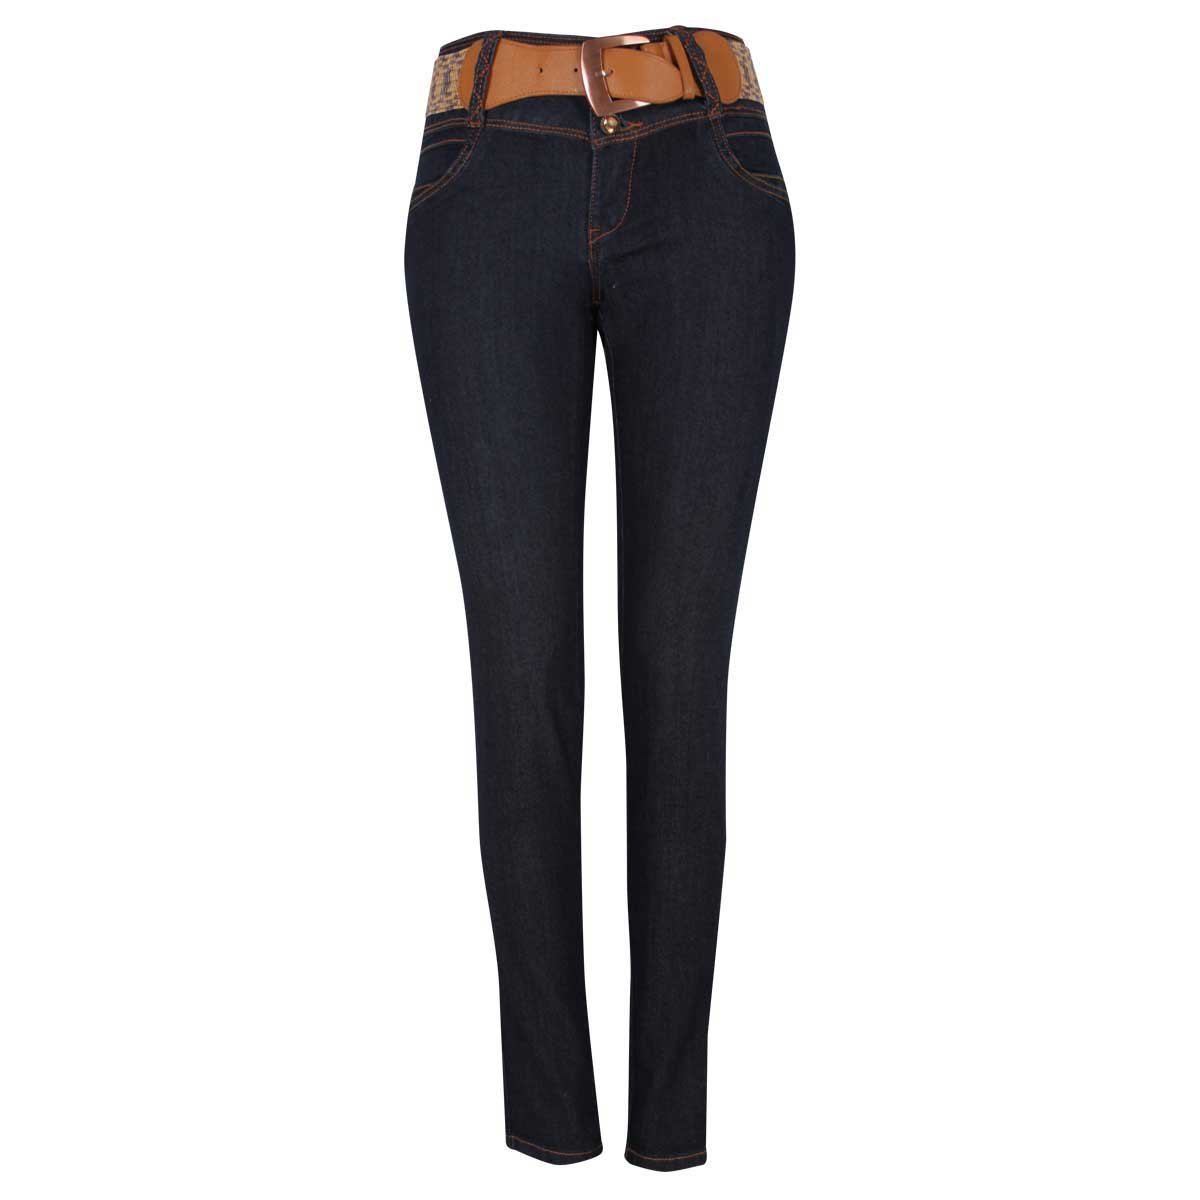 Jeans con Cinturon Ancho Just By Basel